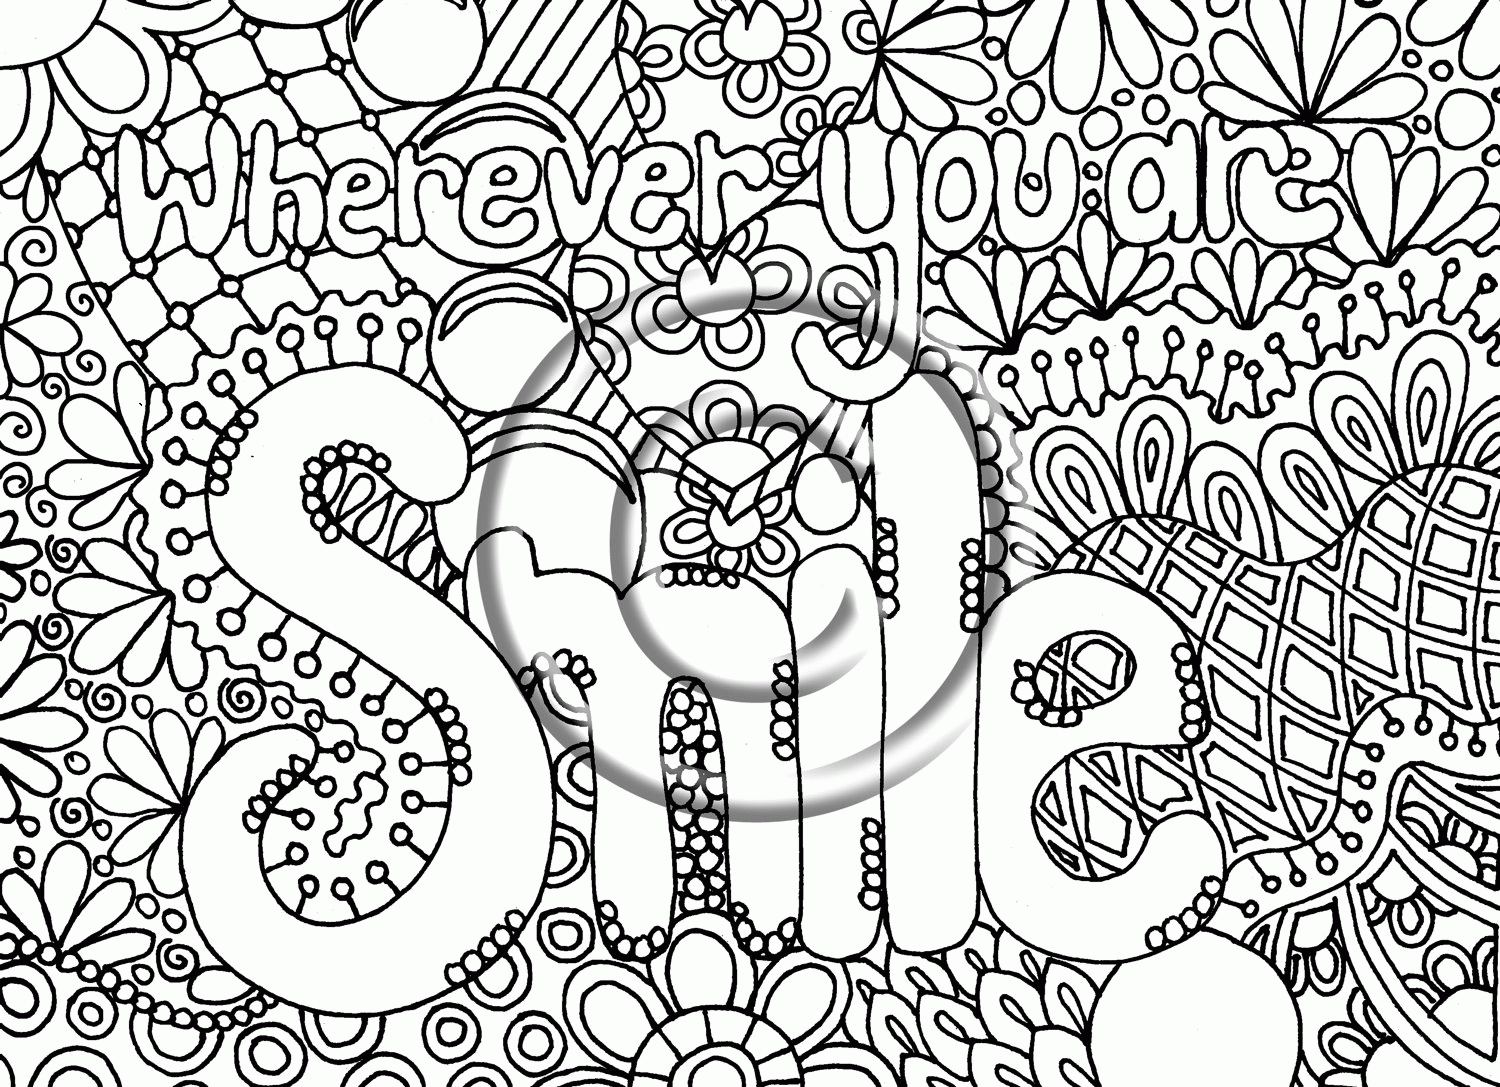 Hard Abstract Coloring Pages Printable - Colorine.net | #3525